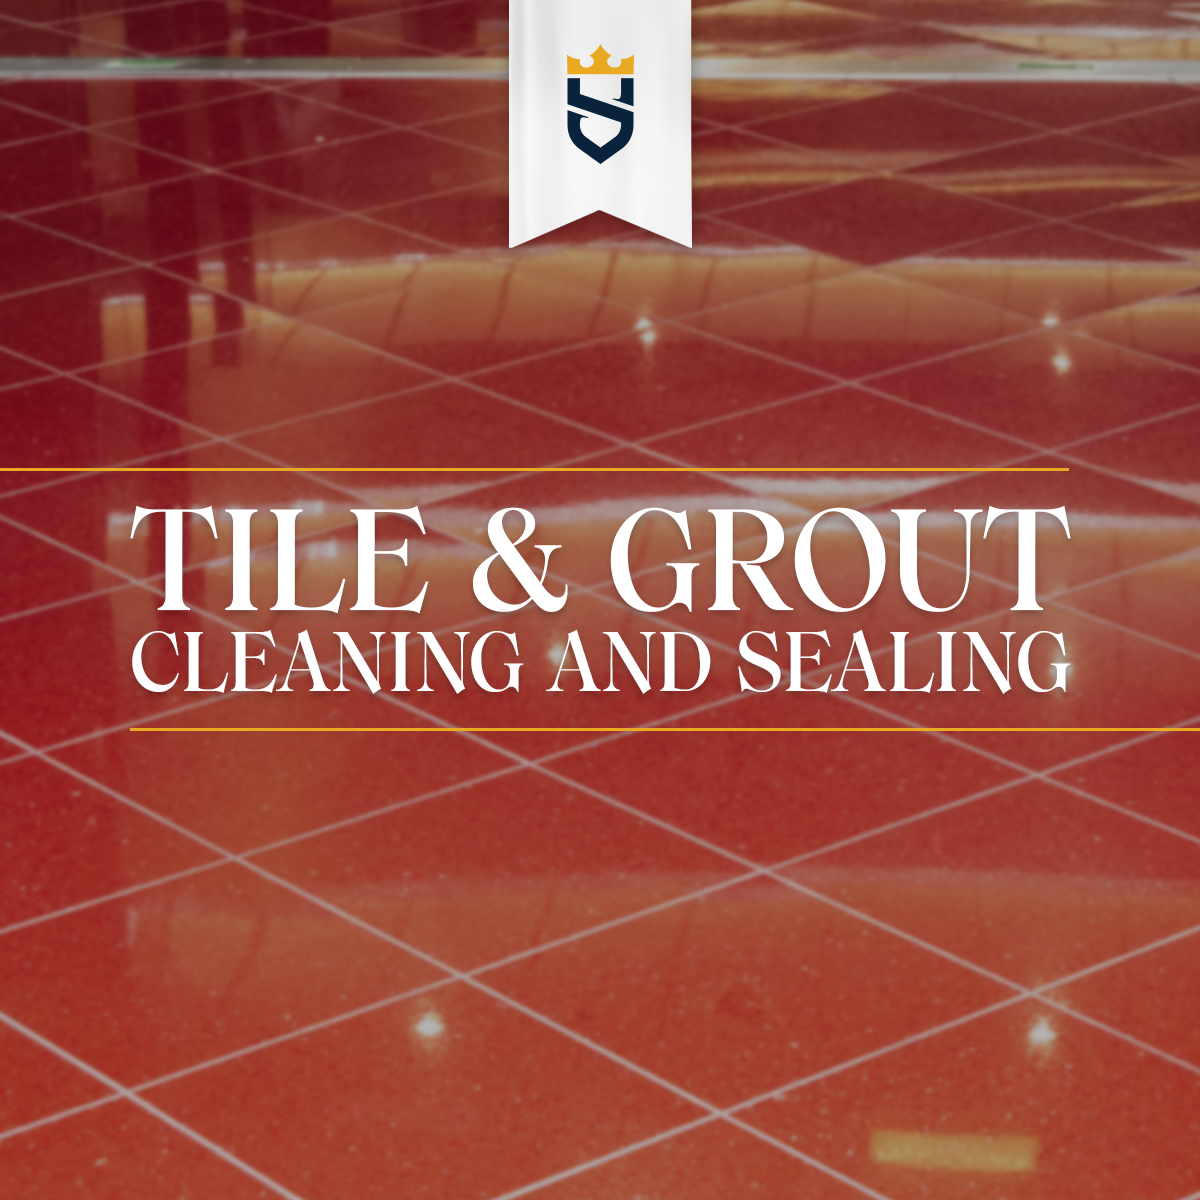 Residential Tile and Grout Services